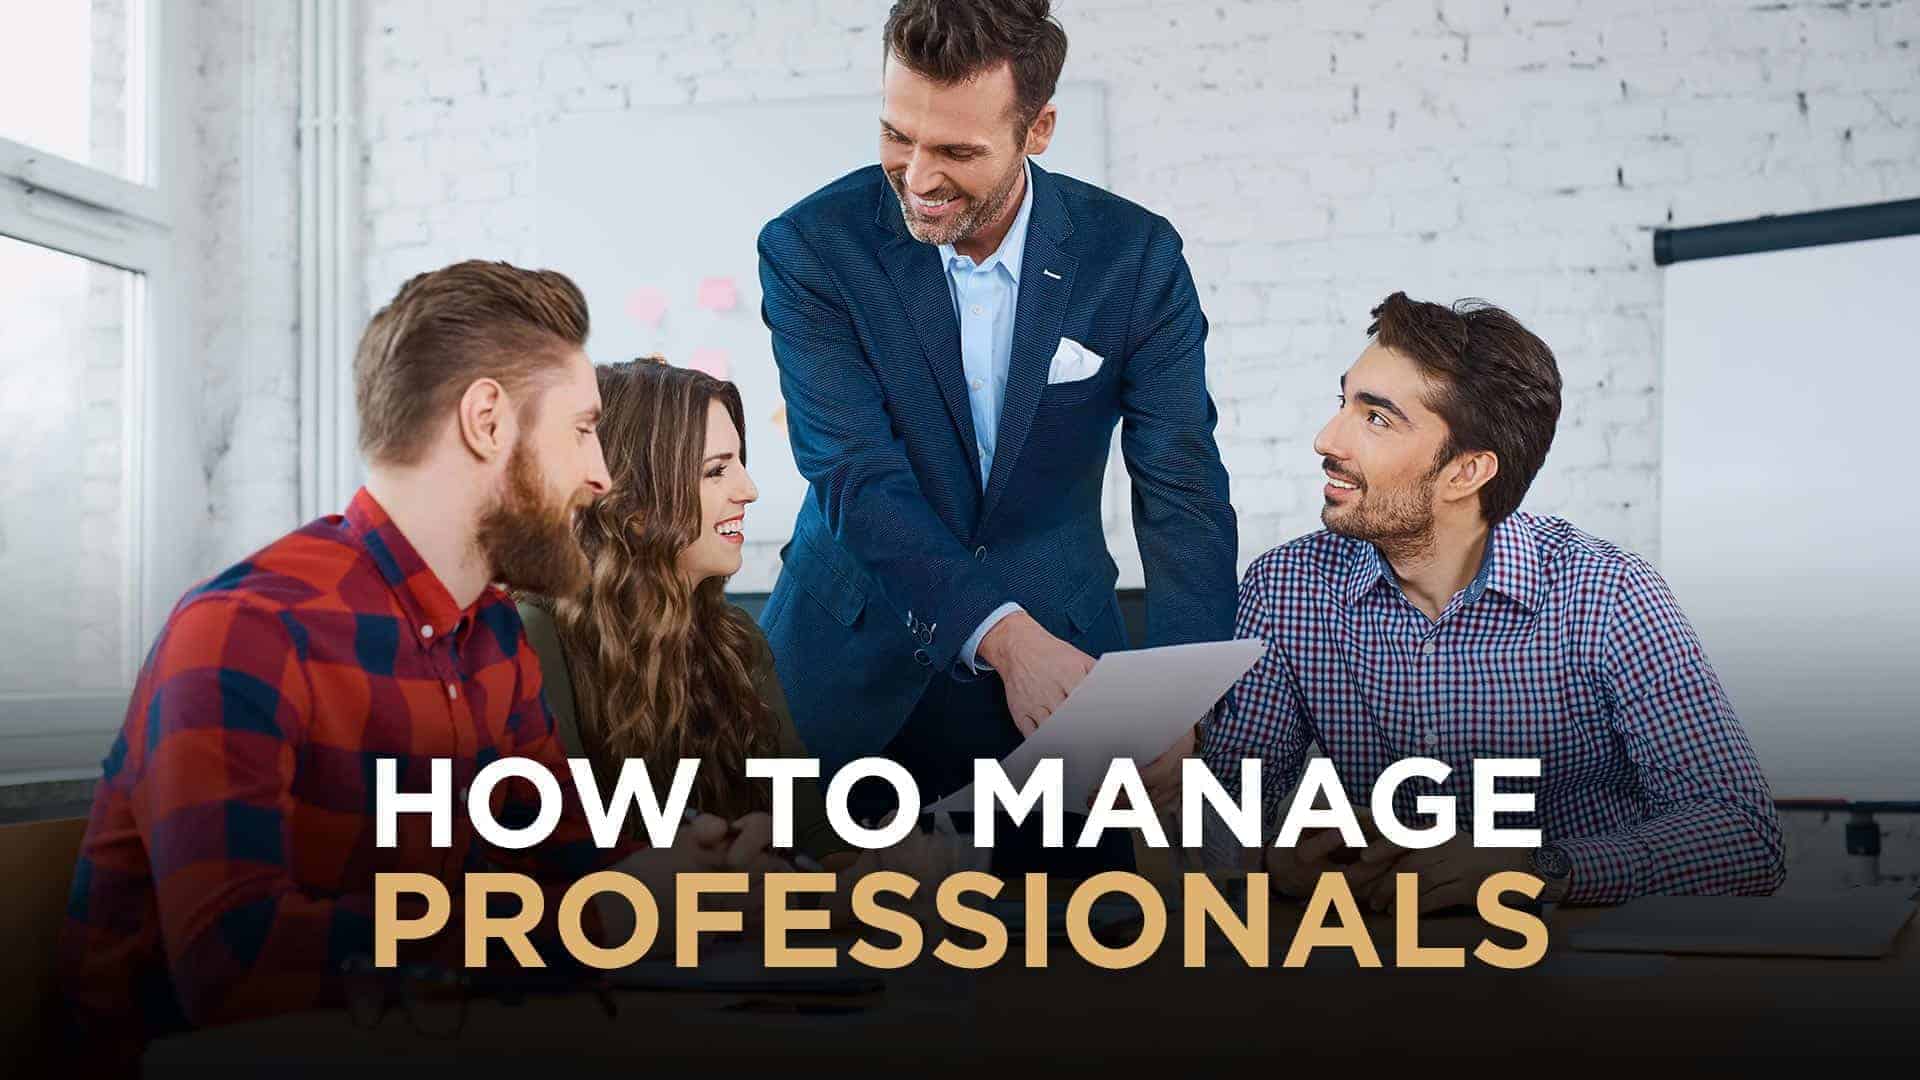 How To Manage Professionals In Ways To Unlock Their Full Potential